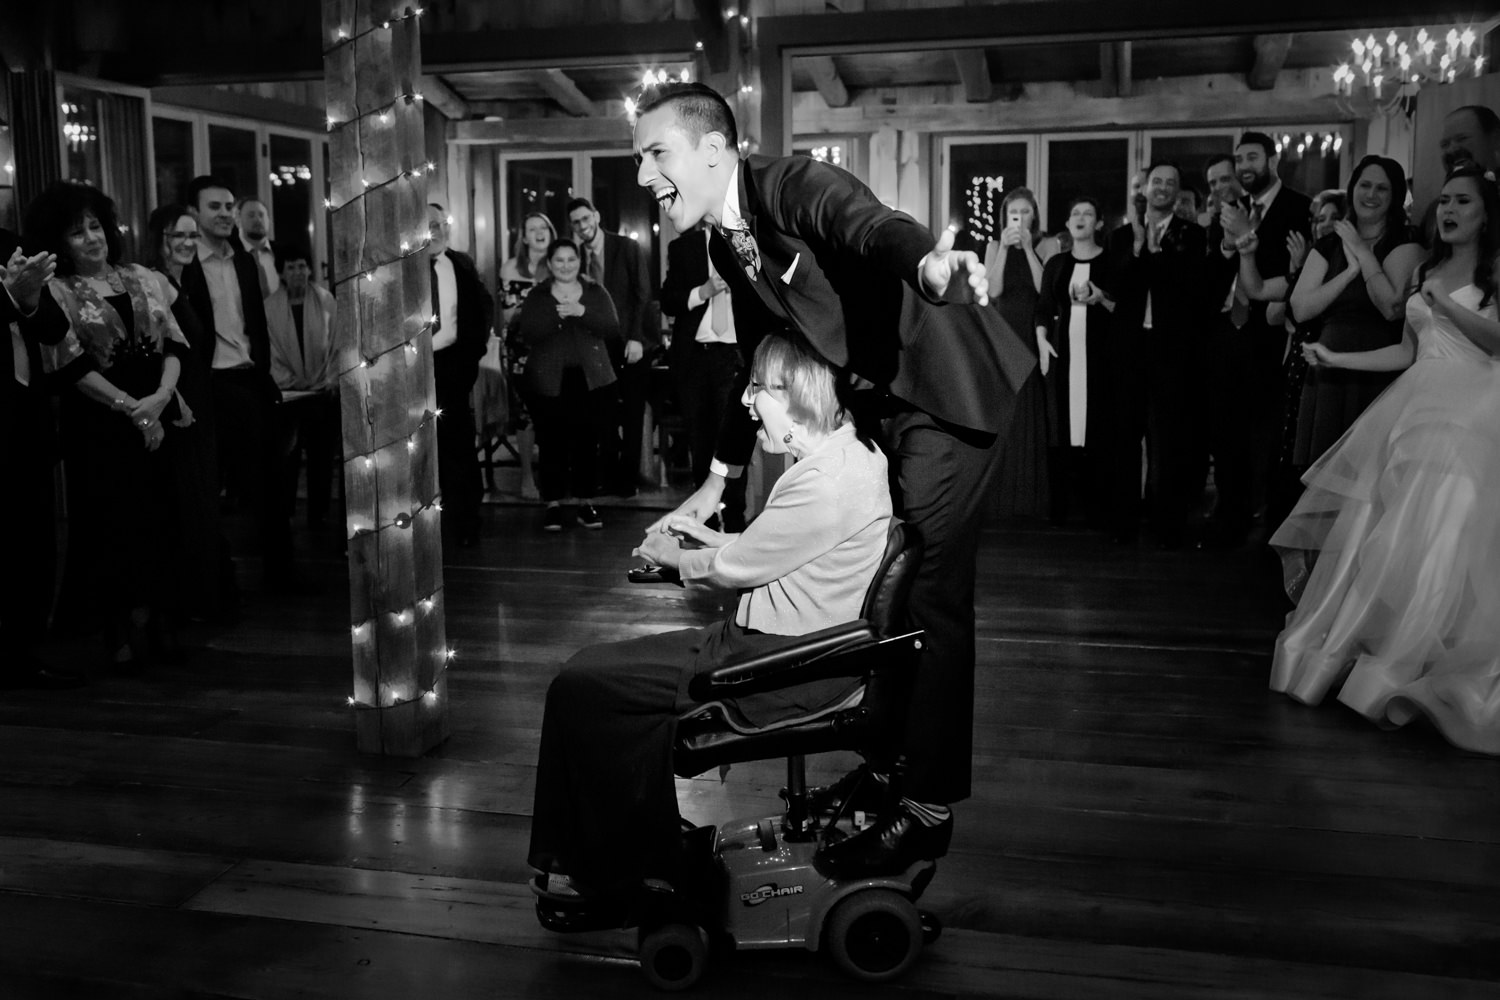 This is a Mountain Memories at Thorpewood wedding in Maryland, the mother of the groom is in a wheelchair, the groom still has his mother son dance with her and her jumps on her motorized wheelchair to spin around with her in dance, loving, beautiful moment between mother and son, Procopio Photography, best top Washington DC photographer, best top Maryland photographer, best top Virginia photographer, best top DMV photographer, best top wedding photographer, best top commercial photographer, best top portrait photographer, best top boudoir photographer, modern fine art portraits, dramatic, unique, different, bold, editorial, photojournalism, award winning photographer, published photographer, memorable images, be different, stand out